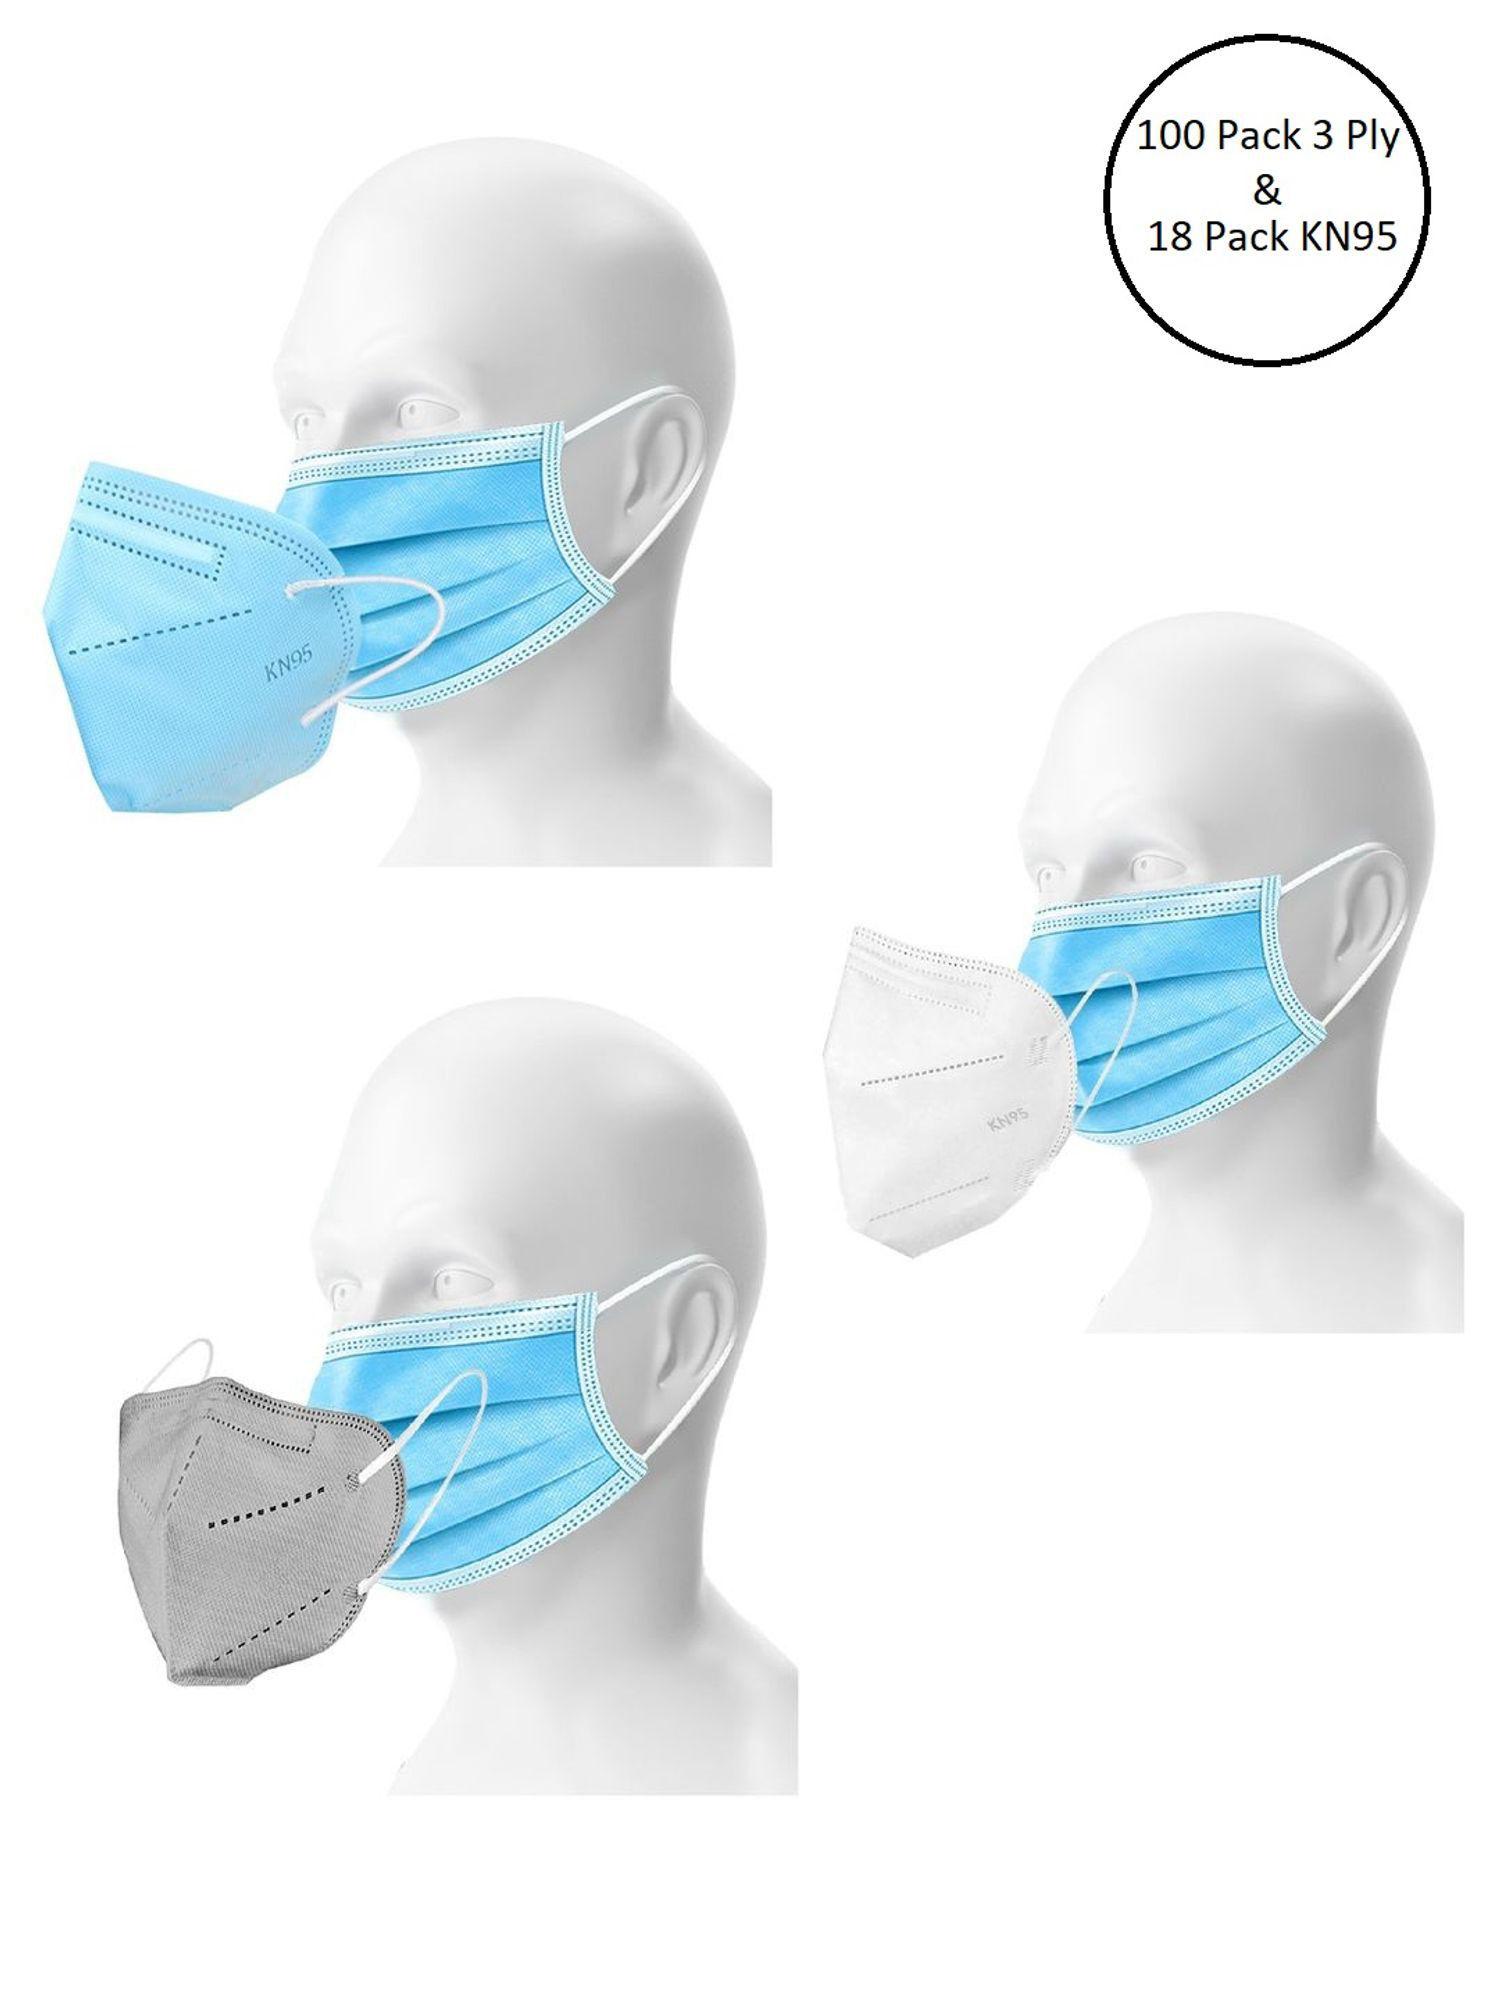 double mask set of 100 disposable 3 ply & 18 kn95 n95 masks